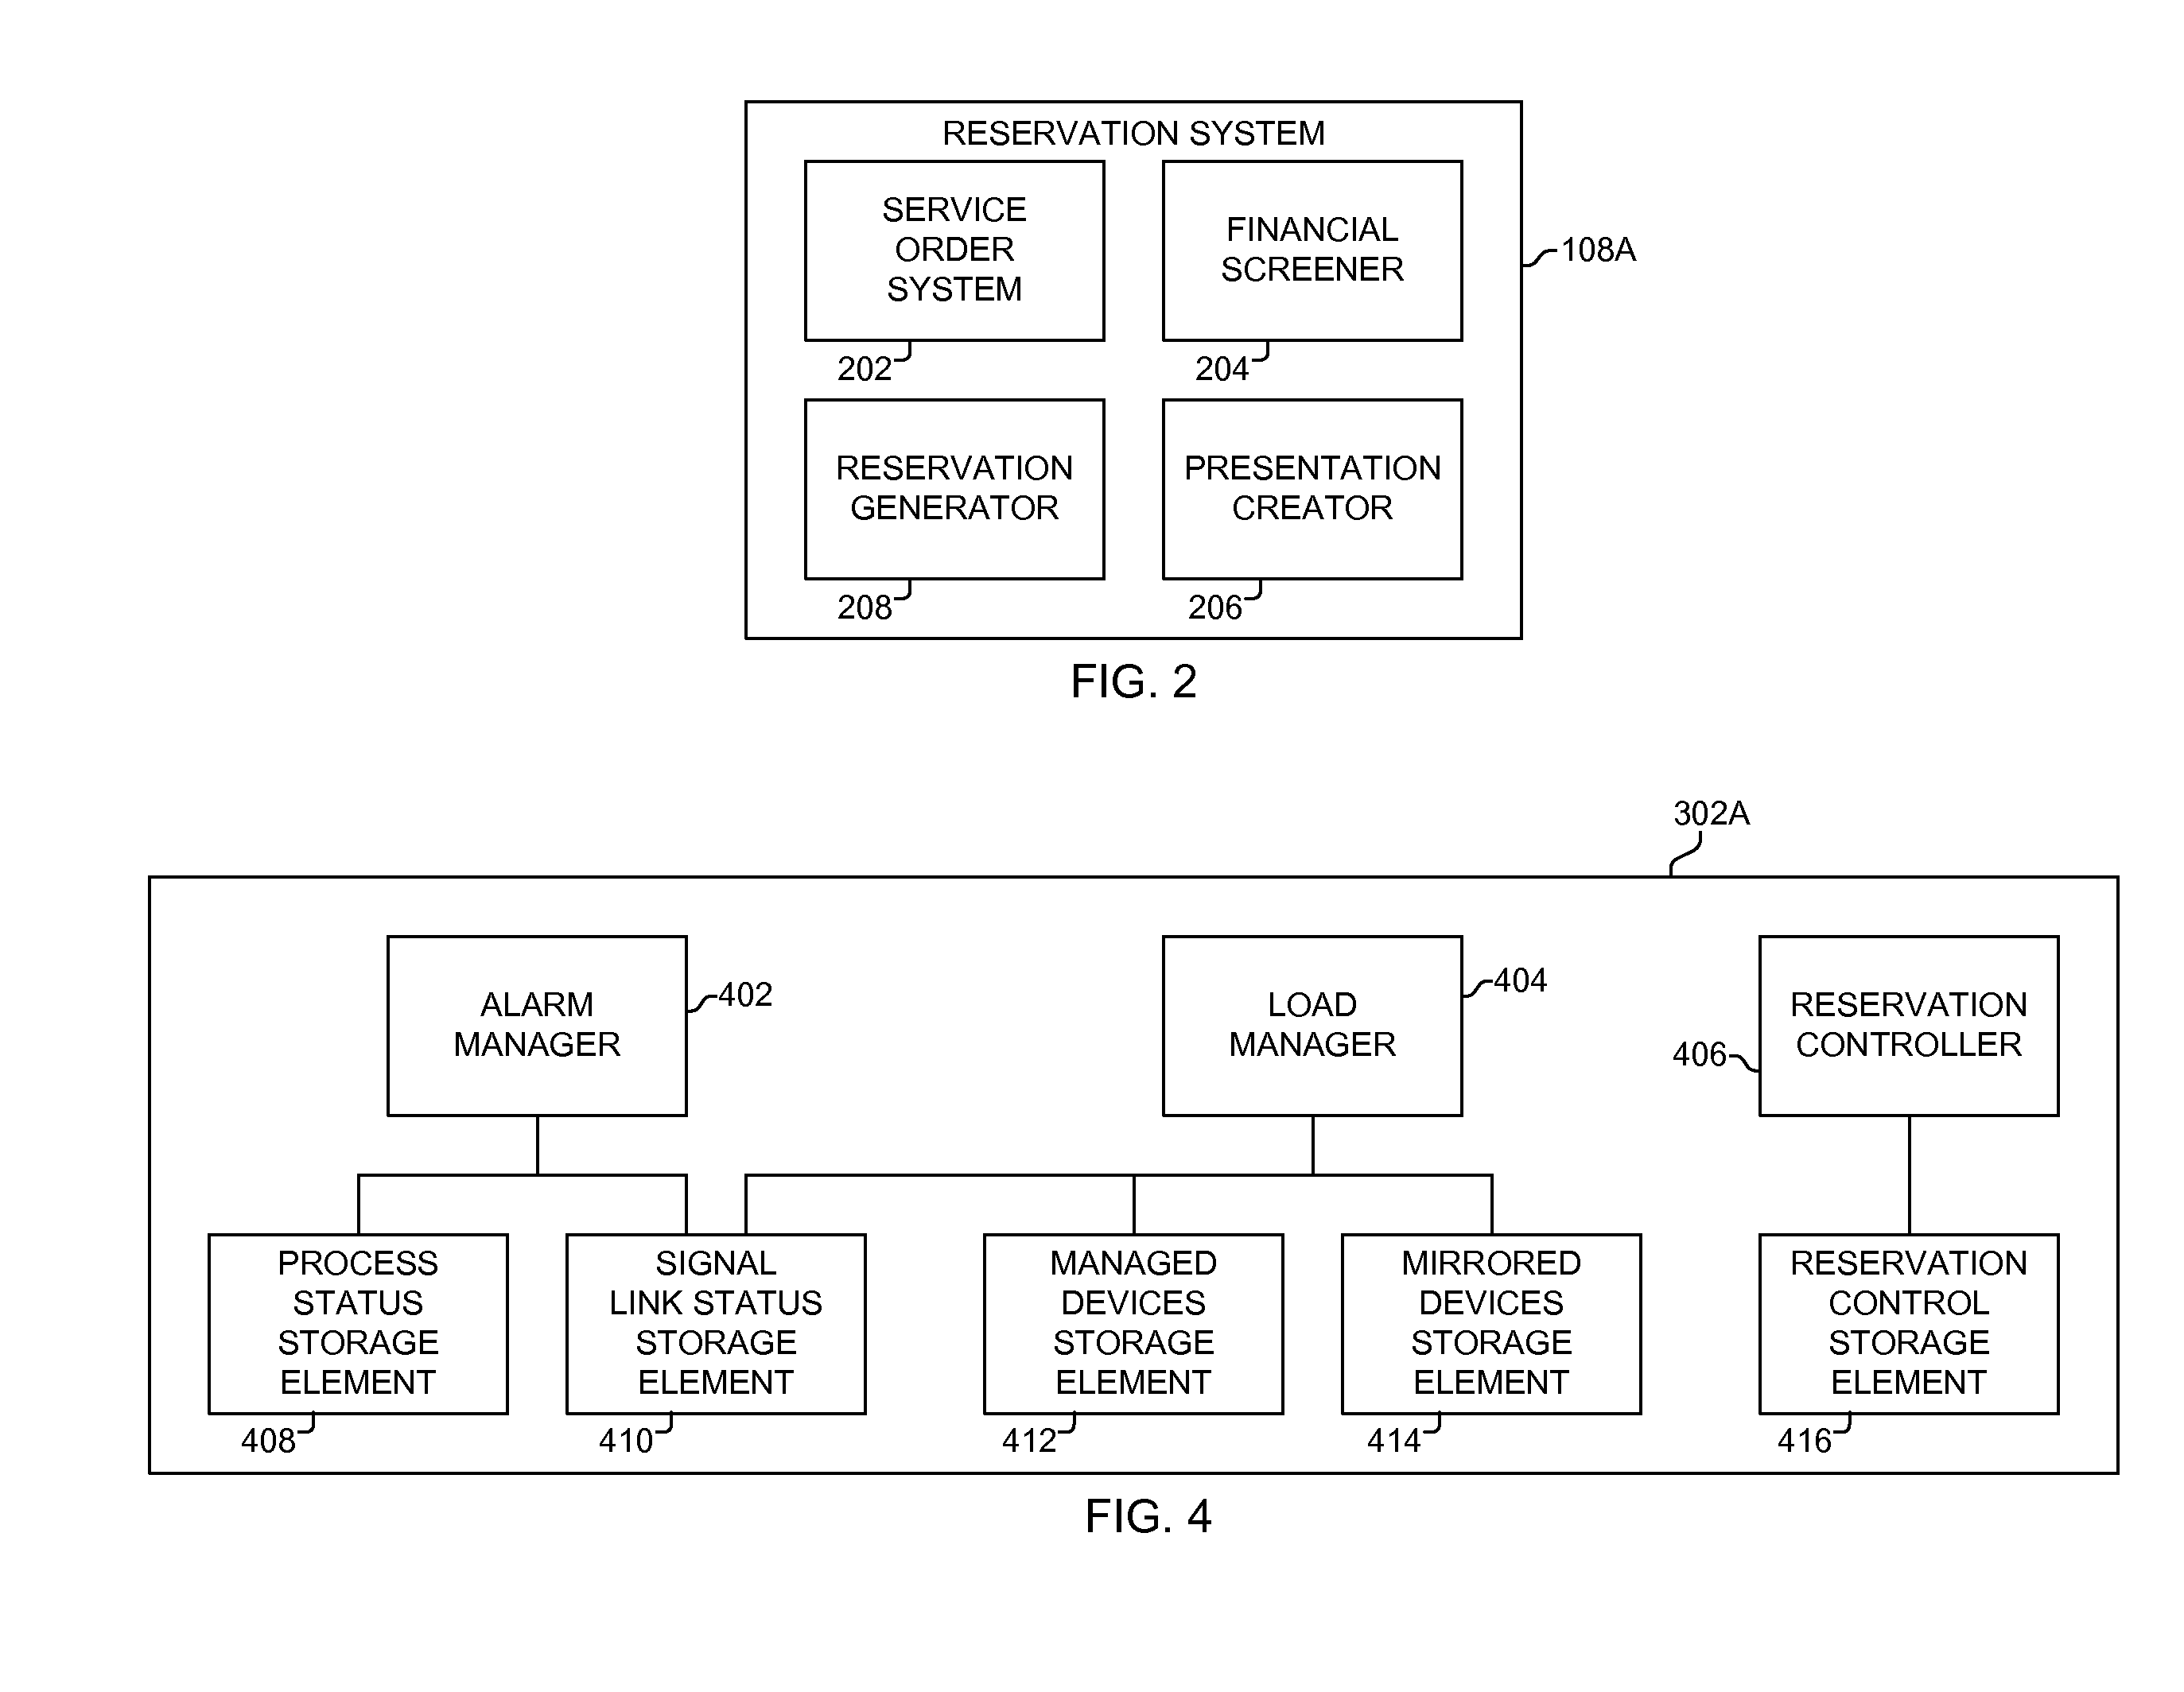 System and method for routing media